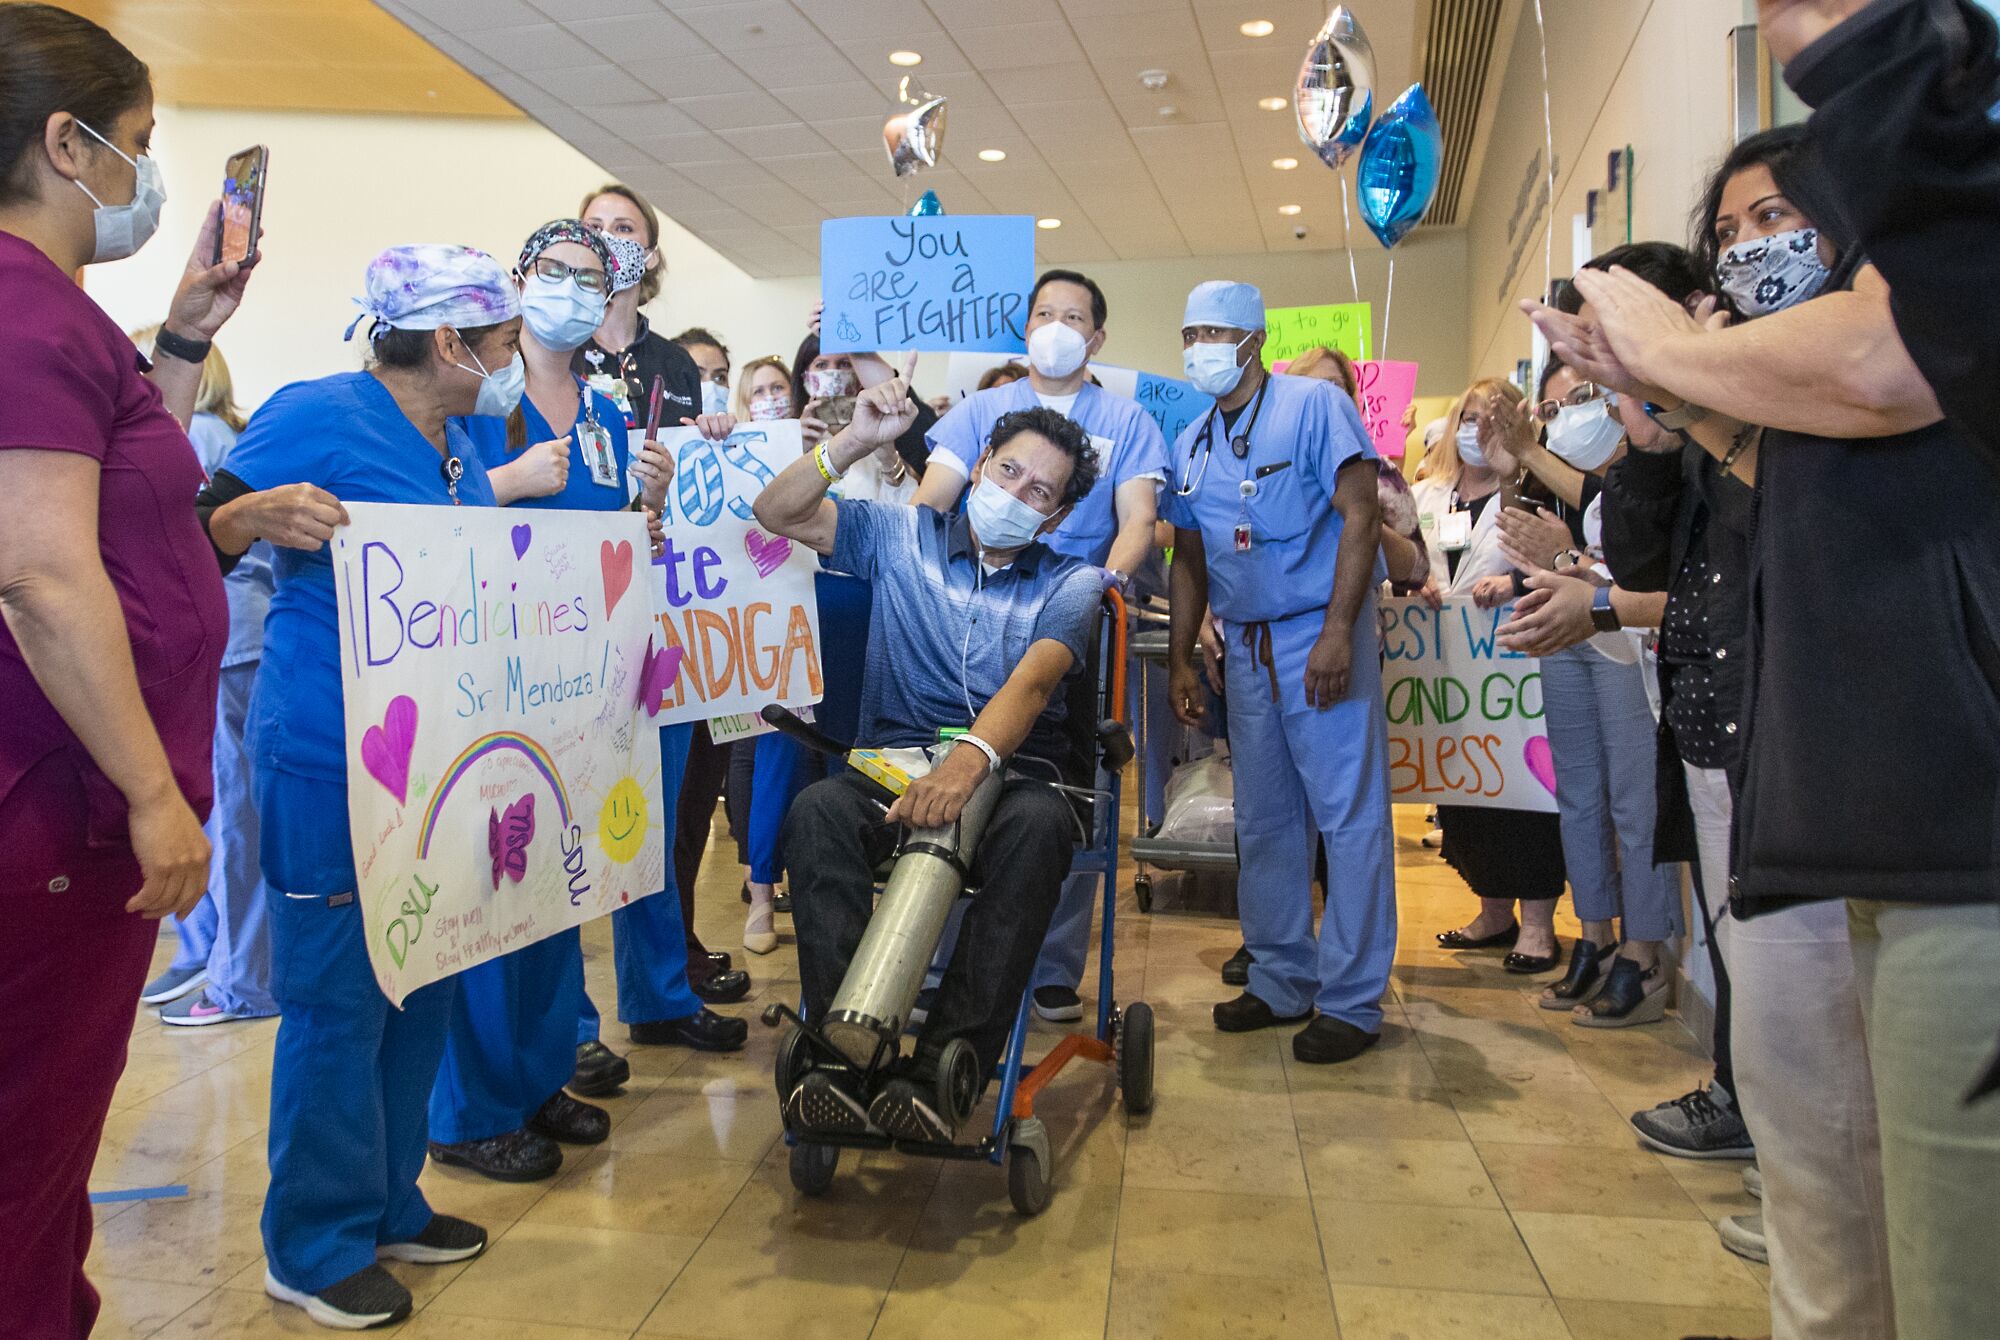 Armando Mendoza, 53, of Anaheim, celebrates with all his health-care professionals and his family after spending 45 days at St. Joseph Hospital in Orange. Mendoza was the hospital's second-ever COVID-19 patient.